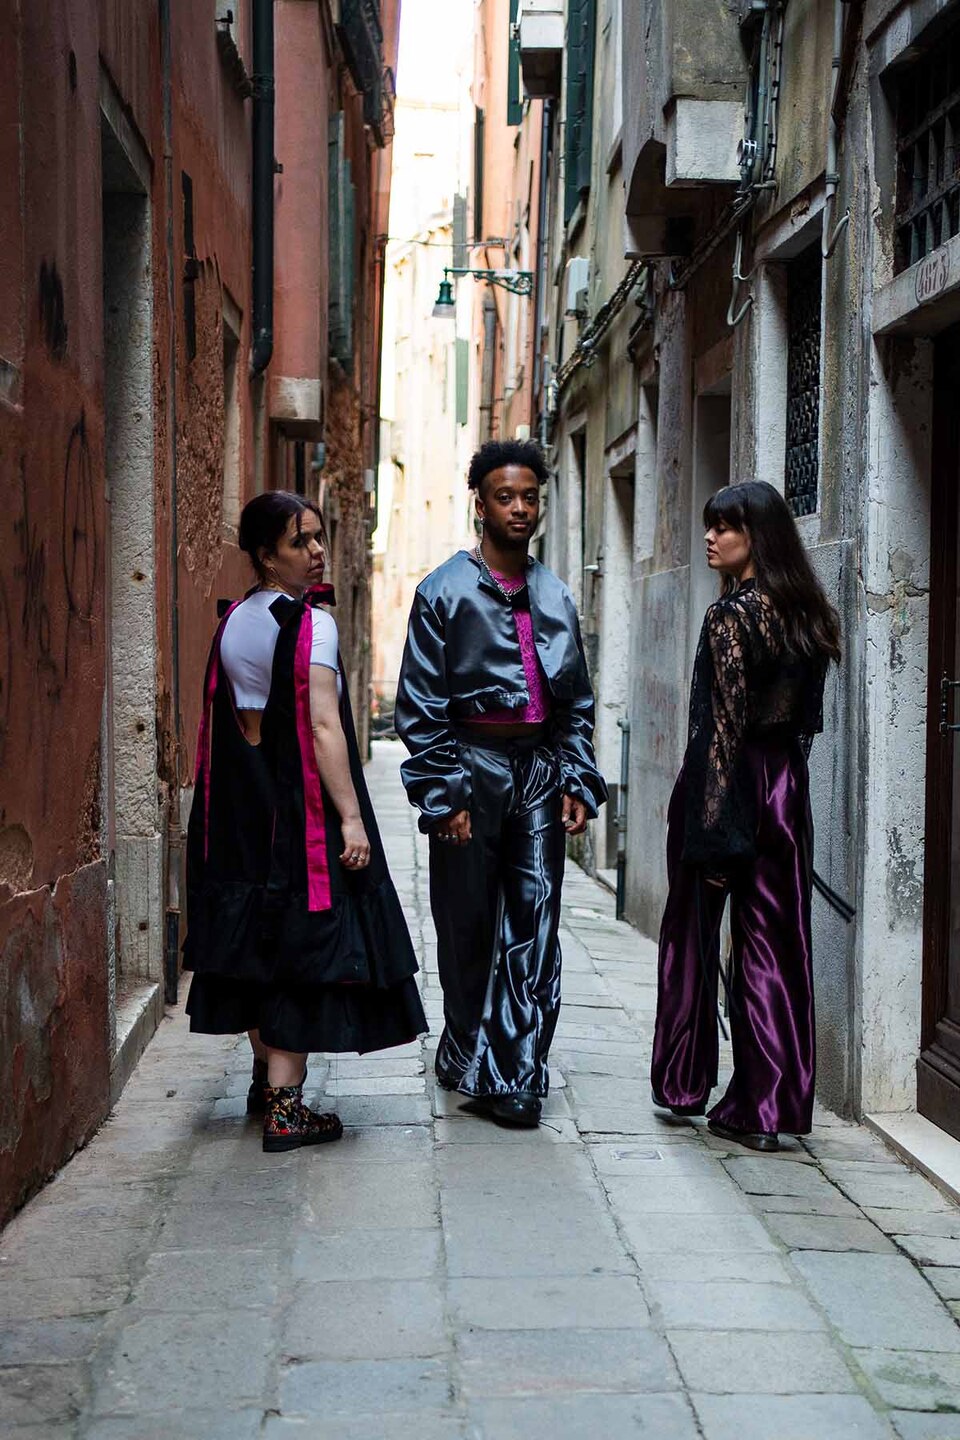 A man and two women modelling Flamenco inspired streetwear from a collection by Paula Pacheco ina narrow street in Seville